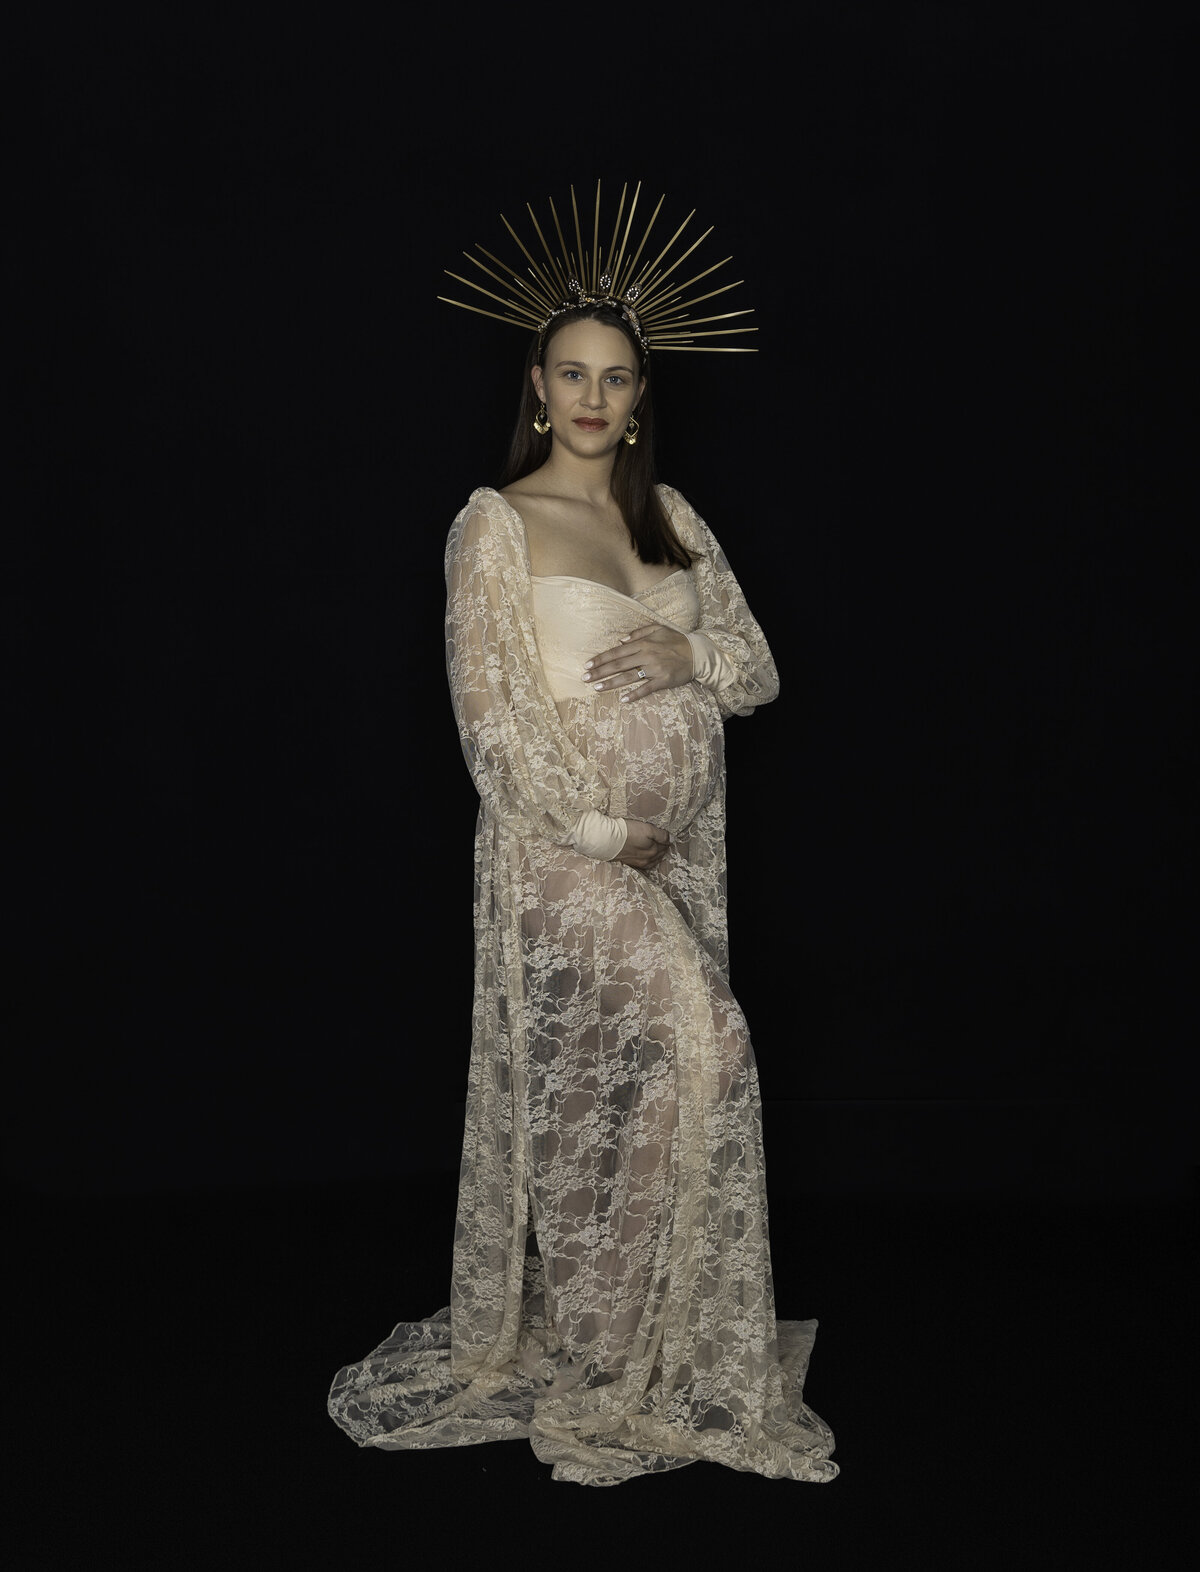 PREGNANT LADY POSING IN LACE MATERNITY GOWN